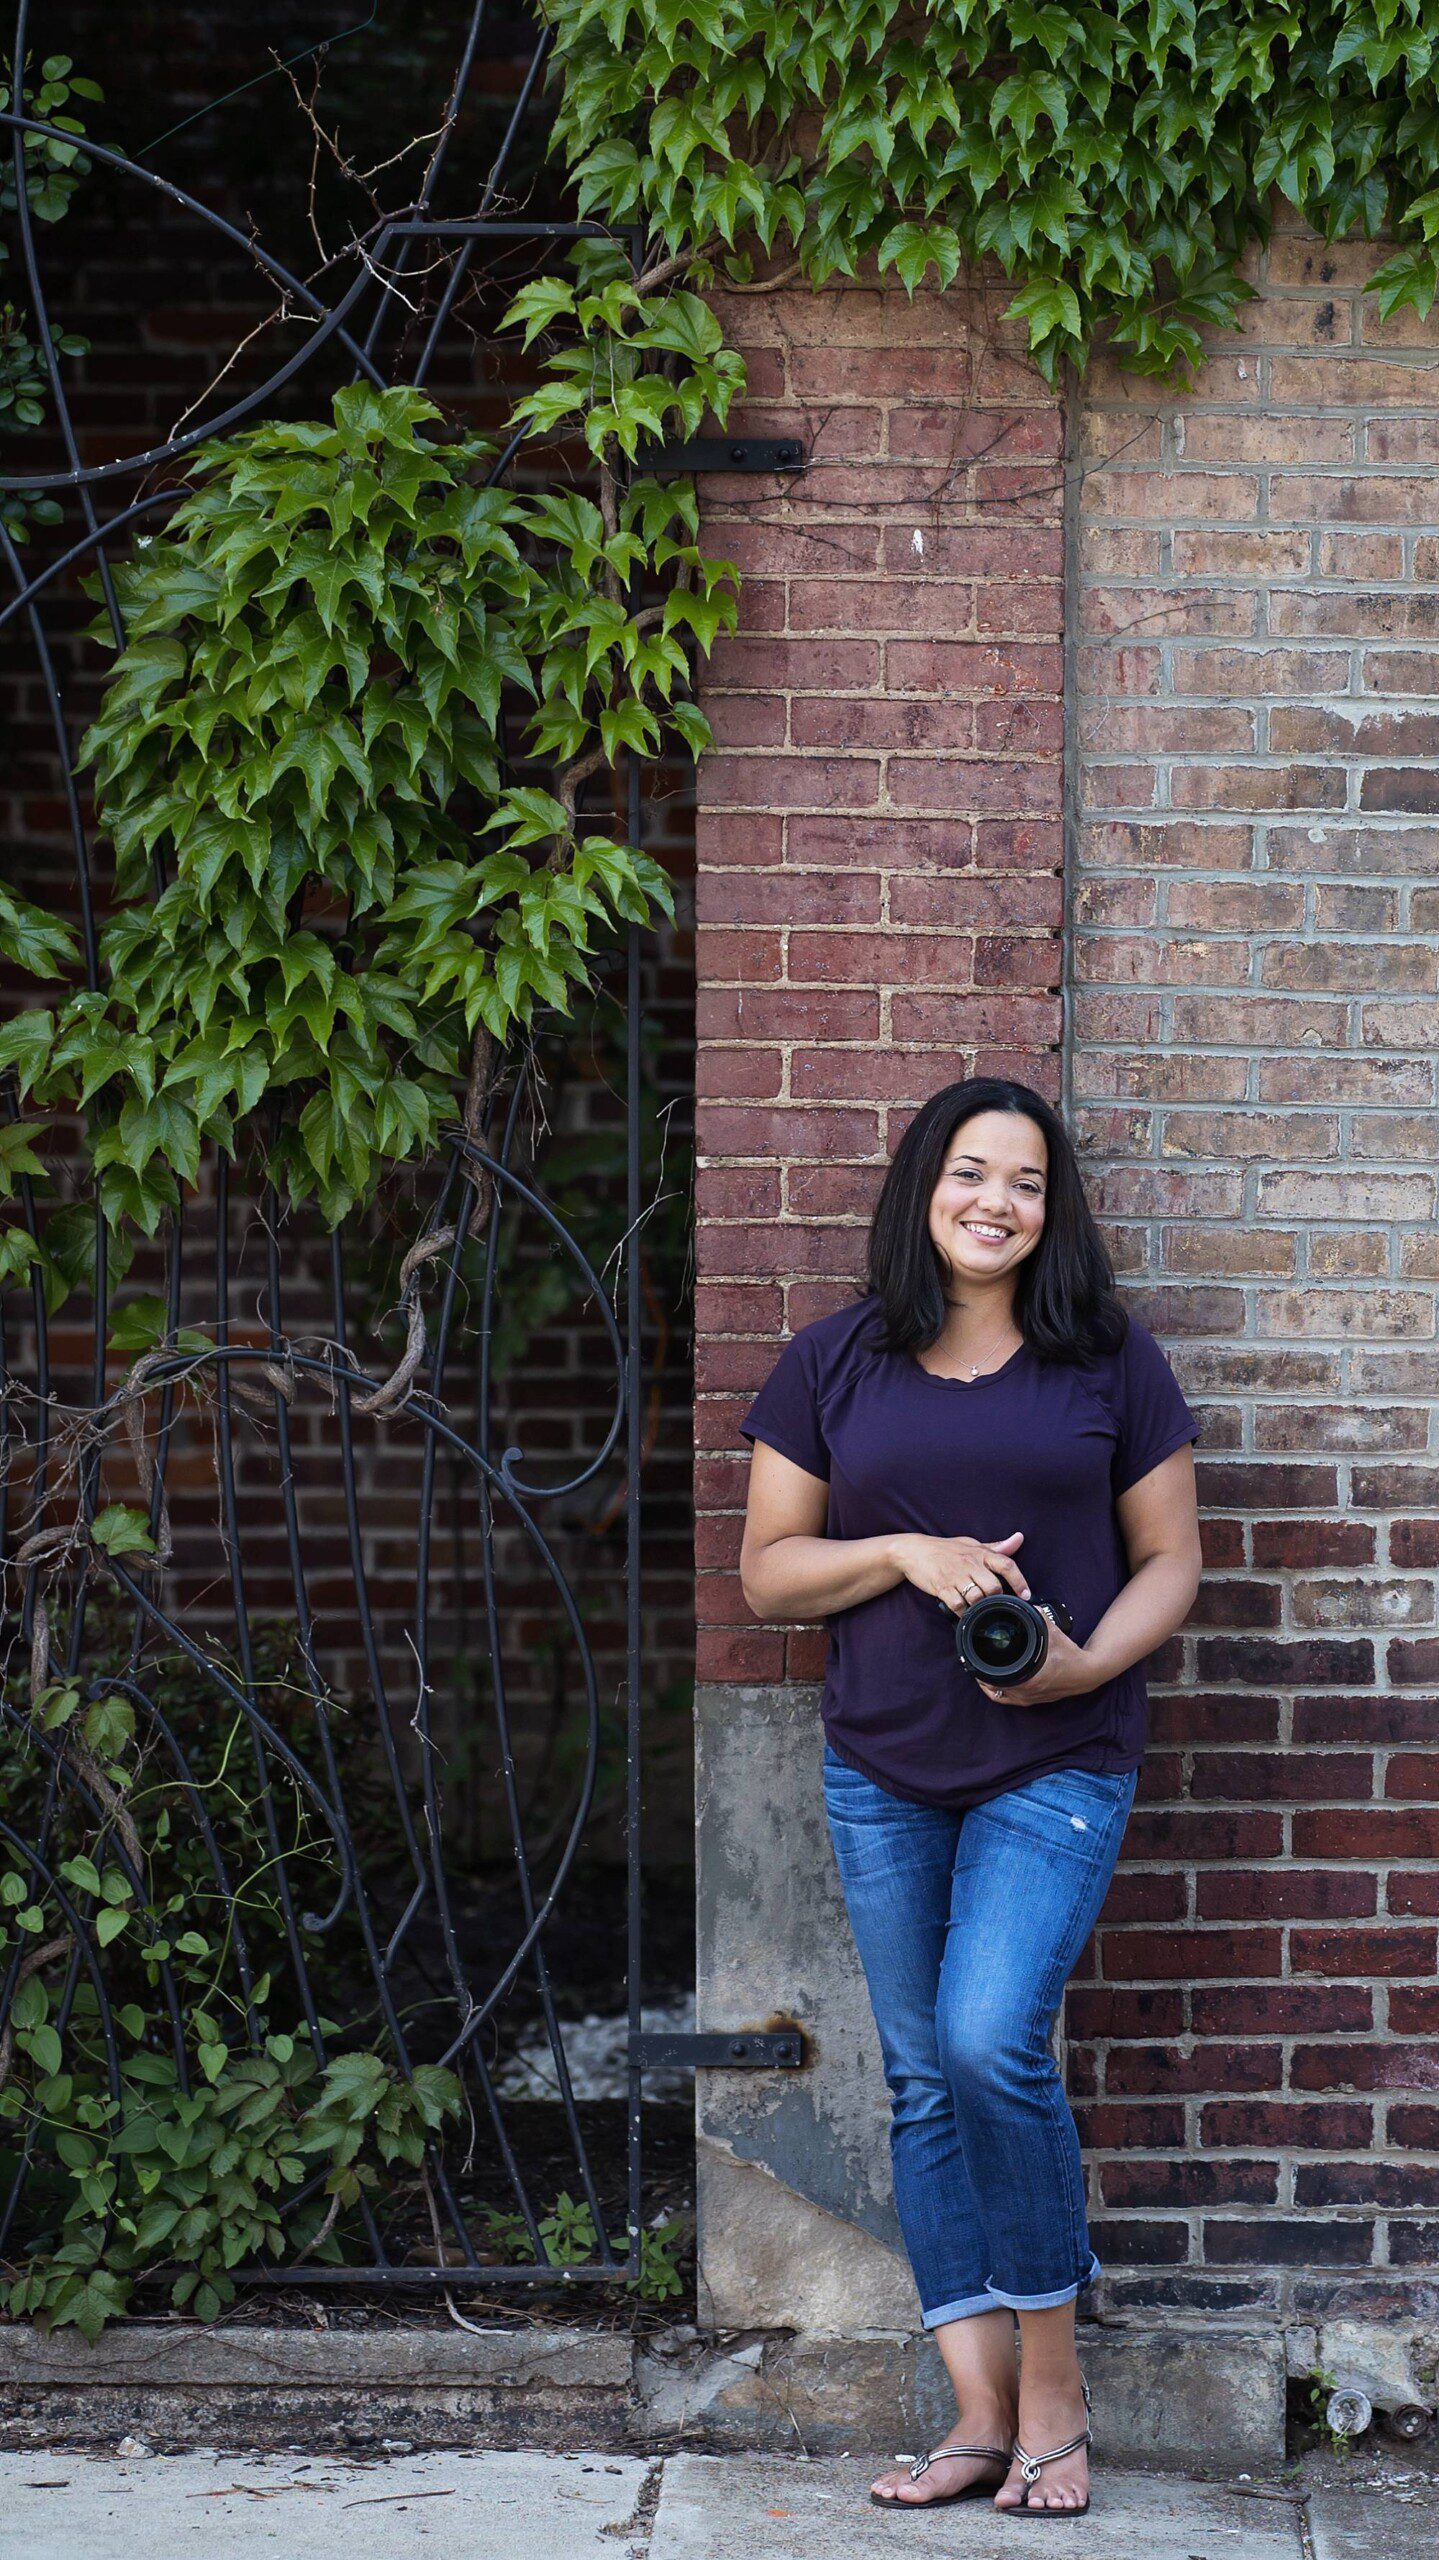 image of Rhaina Taylor, a Pittsburgh area portrait photographer. She's wearing jeans and a purple shirt as she leans against a brick wall in Lawrenceville